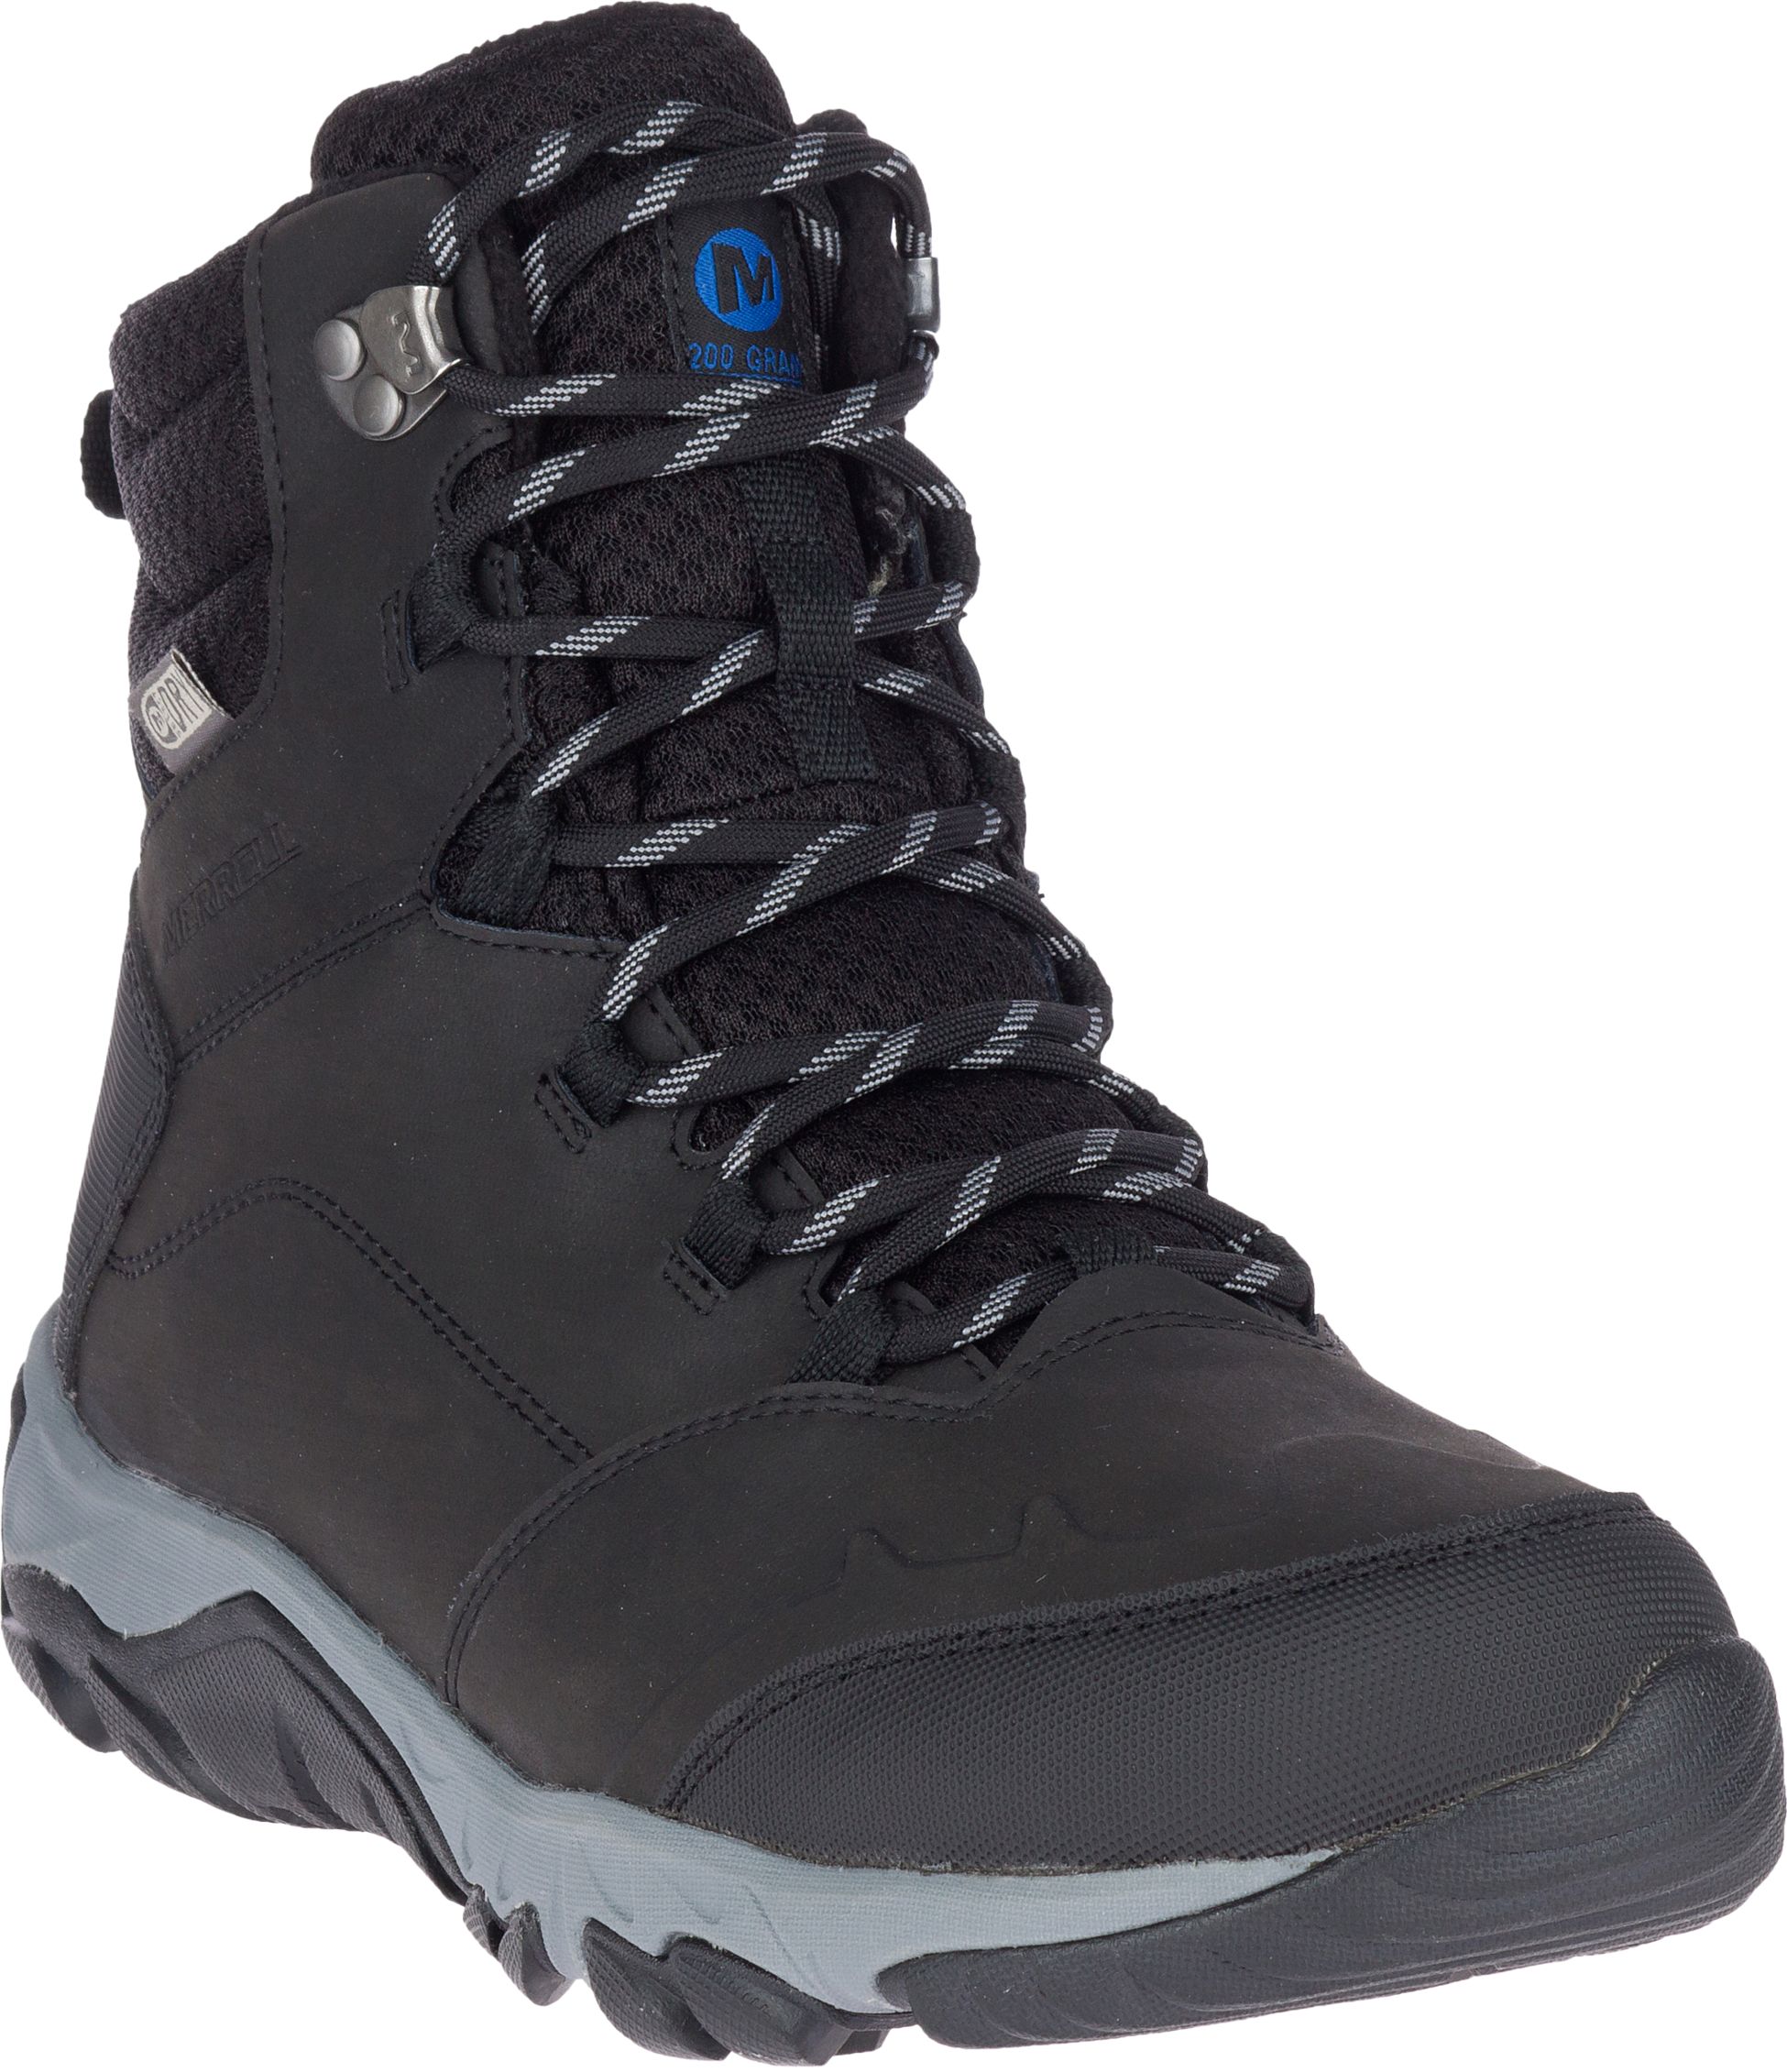 MERRELL, M THERMO FRACTAL MID WTPF